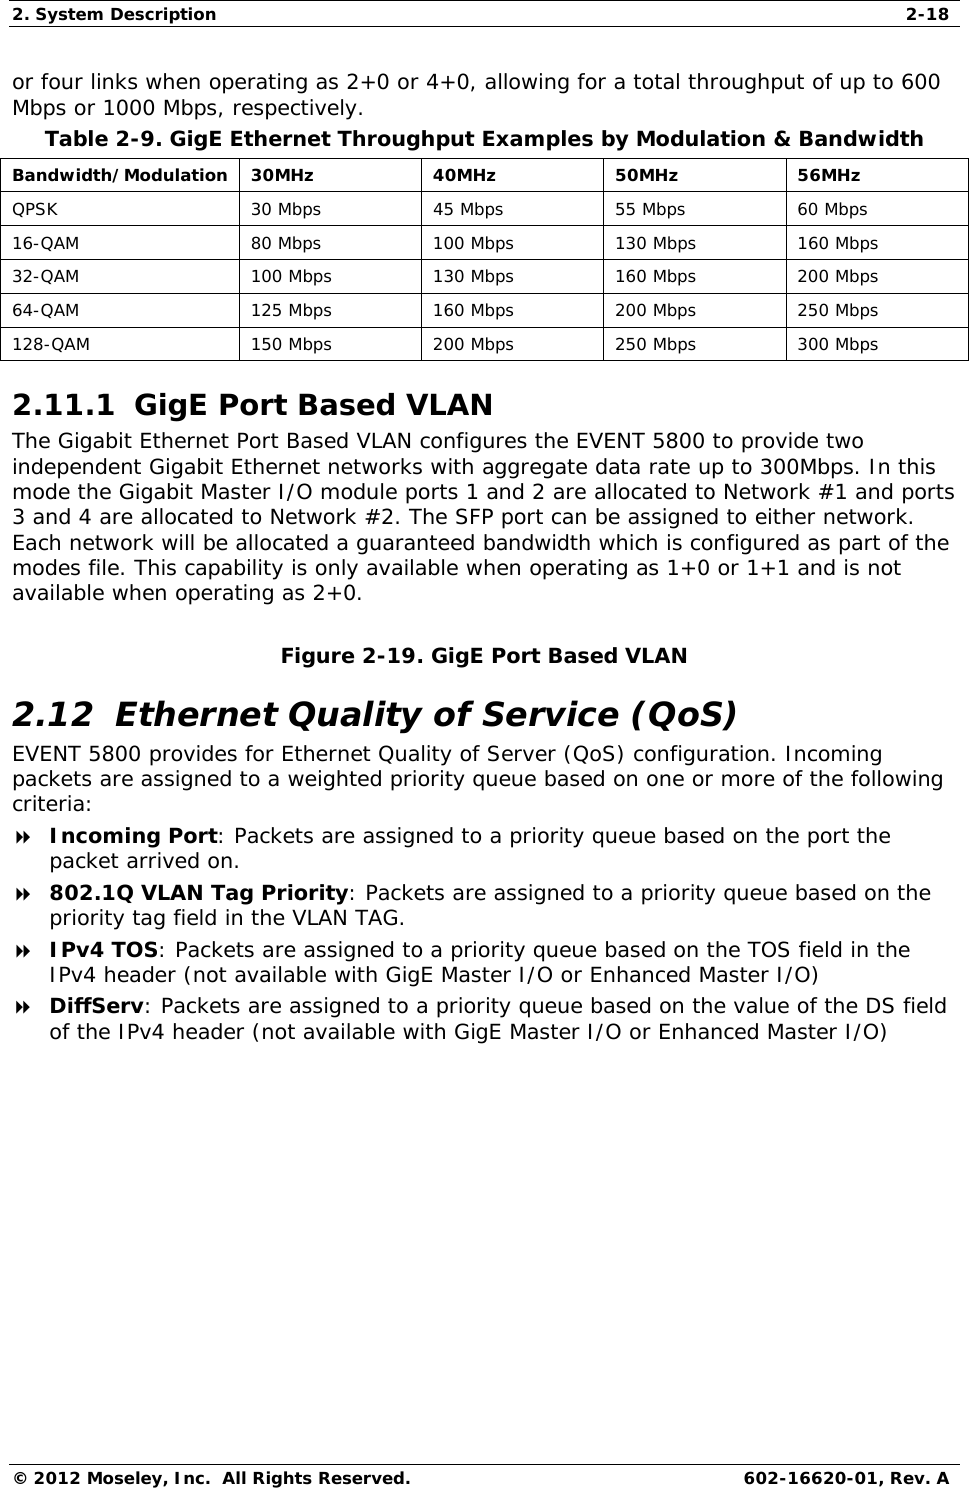 2. System Description  2-18 © 2012 Moseley, Inc.  All Rights Reserved.  602-16620-01, Rev. A or four links when operating as 2+0 or 4+0, allowing for a total throughput of up to 600 Mbps or 1000 Mbps, respectively.  Table 2-9. GigE Ethernet Throughput Examples by Modulation &amp; Bandwidth  Bandwidth/Modulation   30MHz   40MHz   50MHz   56MHz  QPSK   30 Mbps   45 Mbps   55 Mbps   60 Mbps  16-QAM   80 Mbps   100 Mbps   130 Mbps   160 Mbps  32-QAM   100 Mbps   130 Mbps   160 Mbps   200 Mbps  64-QAM   125 Mbps   160 Mbps   200 Mbps   250 Mbps  128-QAM   150 Mbps   200 Mbps   250 Mbps   300 Mbps  2.11.1  GigE Port Based VLAN  The Gigabit Ethernet Port Based VLAN configures the EVENT 5800 to provide two independent Gigabit Ethernet networks with aggregate data rate up to 300Mbps. In this mode the Gigabit Master I/O module ports 1 and 2 are allocated to Network #1 and ports 3 and 4 are allocated to Network #2. The SFP port can be assigned to either network. Each network will be allocated a guaranteed bandwidth which is configured as part of the modes file. This capability is only available when operating as 1+0 or 1+1 and is not available when operating as 2+0.    Figure 2-19. GigE Port Based VLAN 2.12  Ethernet Quality of Service (QoS)  EVENT 5800 provides for Ethernet Quality of Server (QoS) configuration. Incoming packets are assigned to a weighted priority queue based on one or more of the following criteria:   Incoming Port: Packets are assigned to a priority queue based on the port the packet arrived on.   802.1Q VLAN Tag Priority: Packets are assigned to a priority queue based on the priority tag field in the VLAN TAG.   IPv4 TOS: Packets are assigned to a priority queue based on the TOS field in the IPv4 header (not available with GigE Master I/O or Enhanced Master I/O)   DiffServ: Packets are assigned to a priority queue based on the value of the DS field of the IPv4 header (not available with GigE Master I/O or Enhanced Master I/O)  